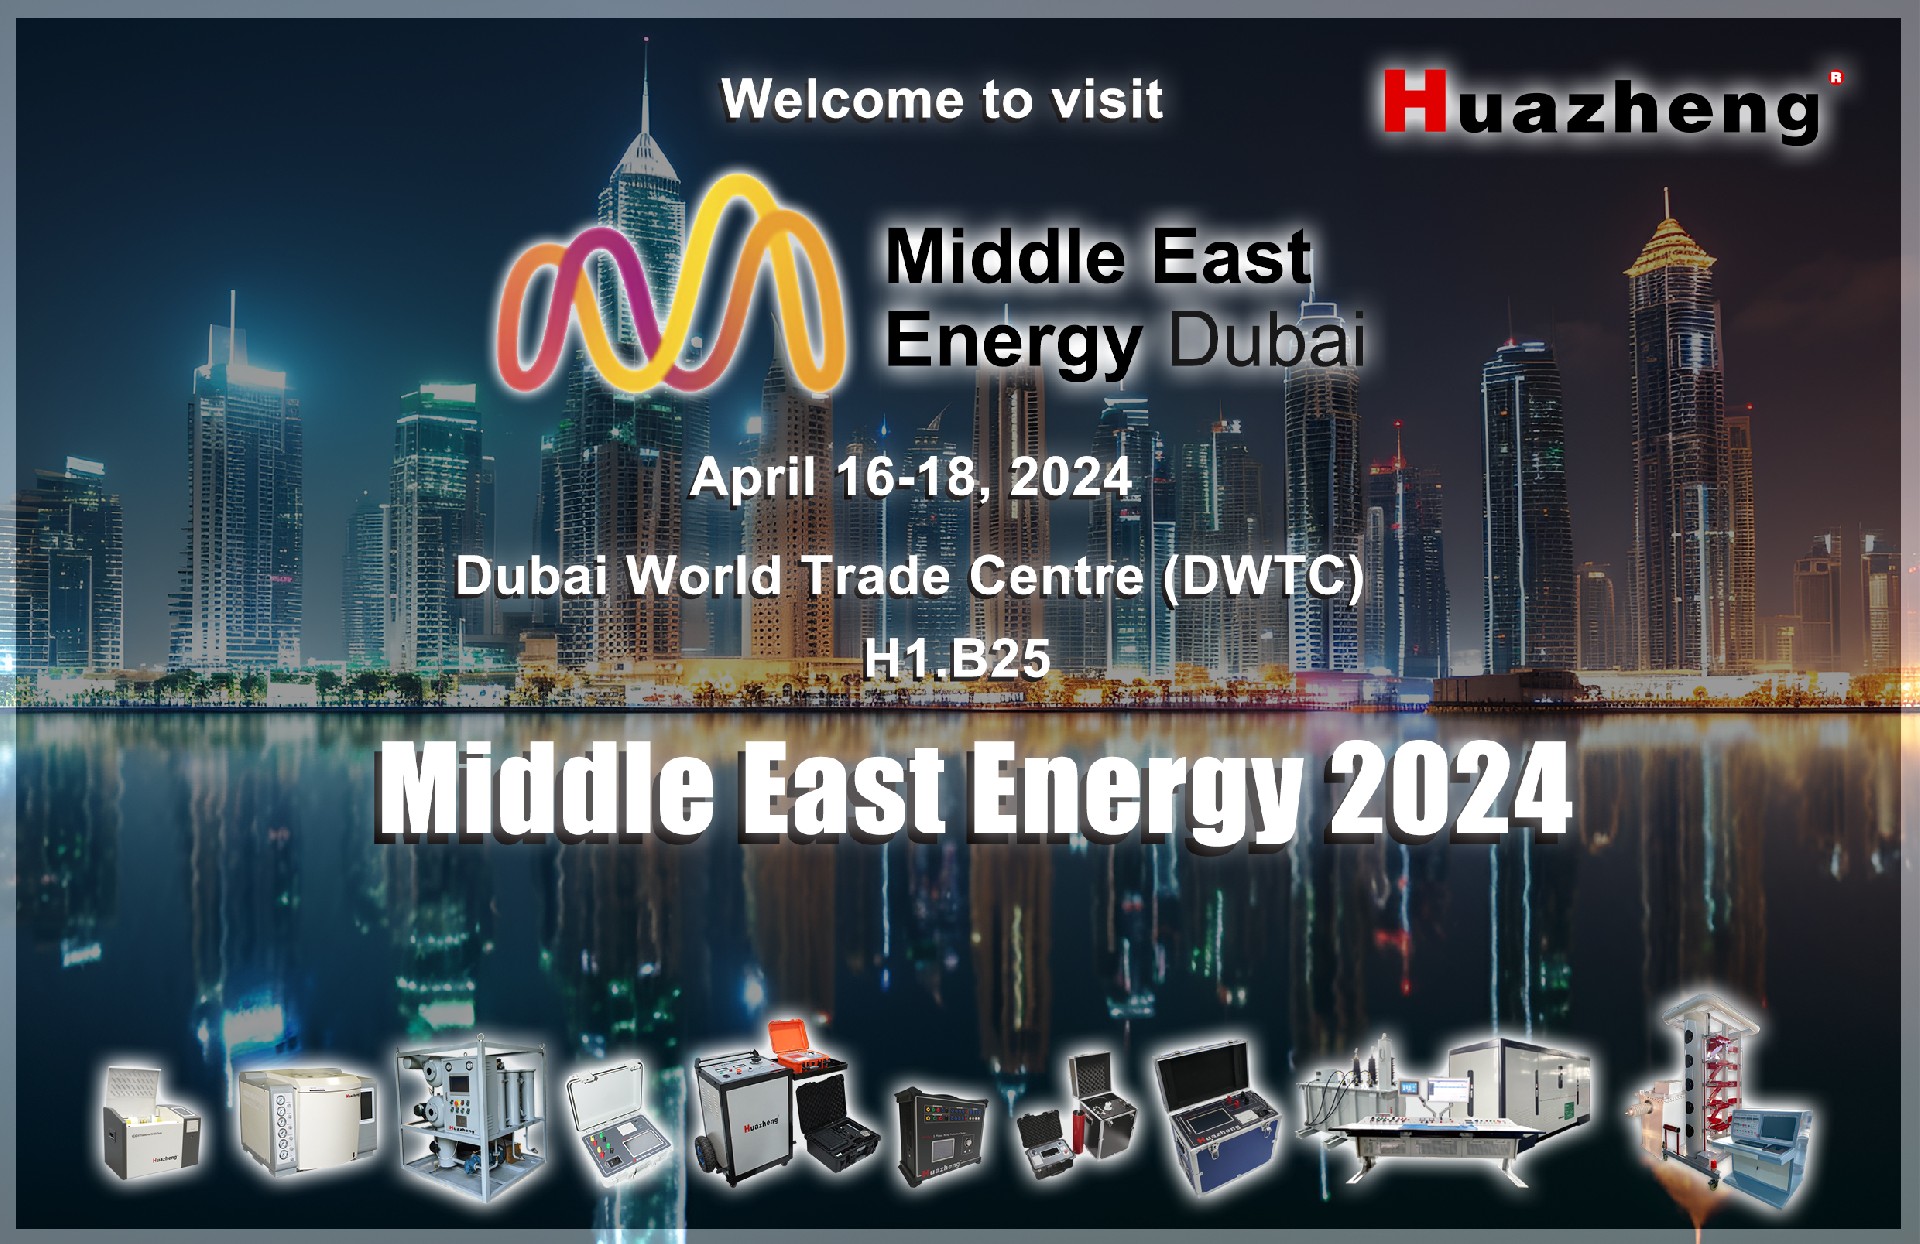 Huazheng Electric Will Be Participating in Middle East Energy！！！